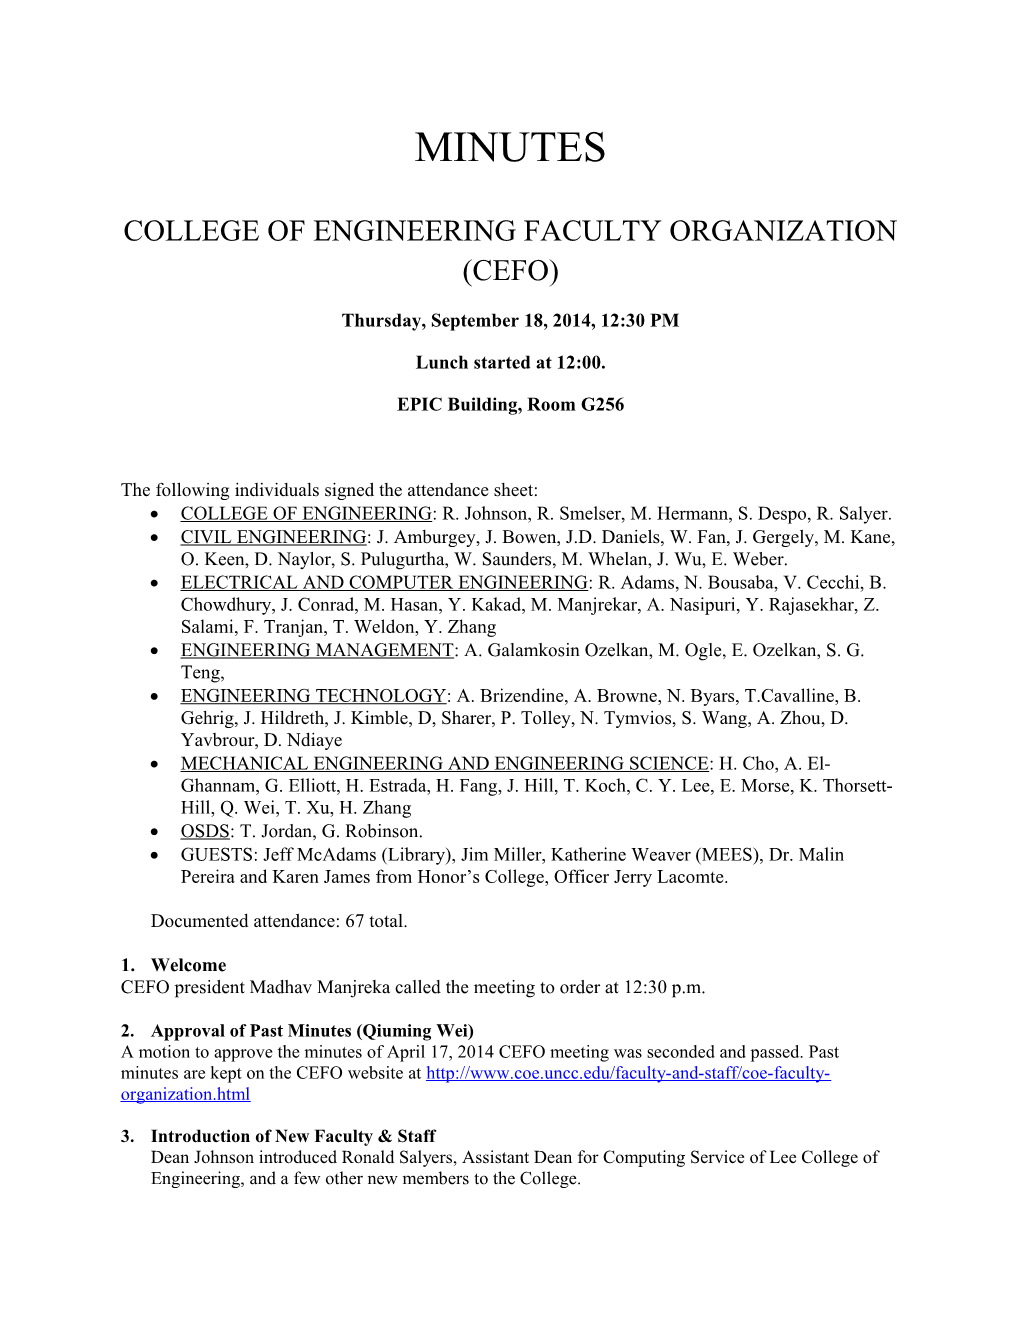 College of Engineering Faculty Organization (Cefo)